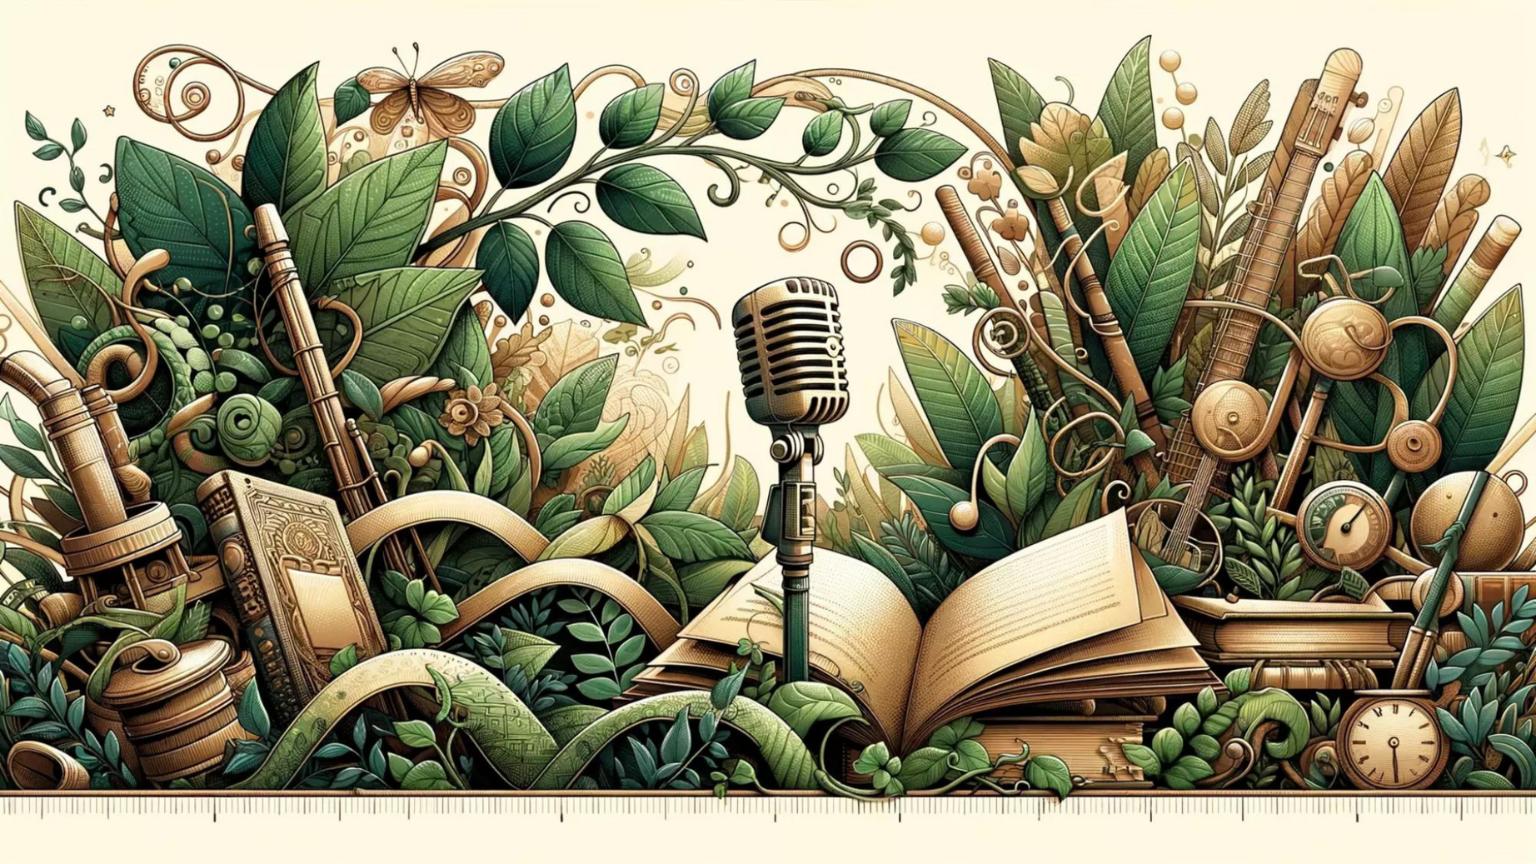 An image of a book, microphone, pencils, and clocks surrounded by green vines and leaves.